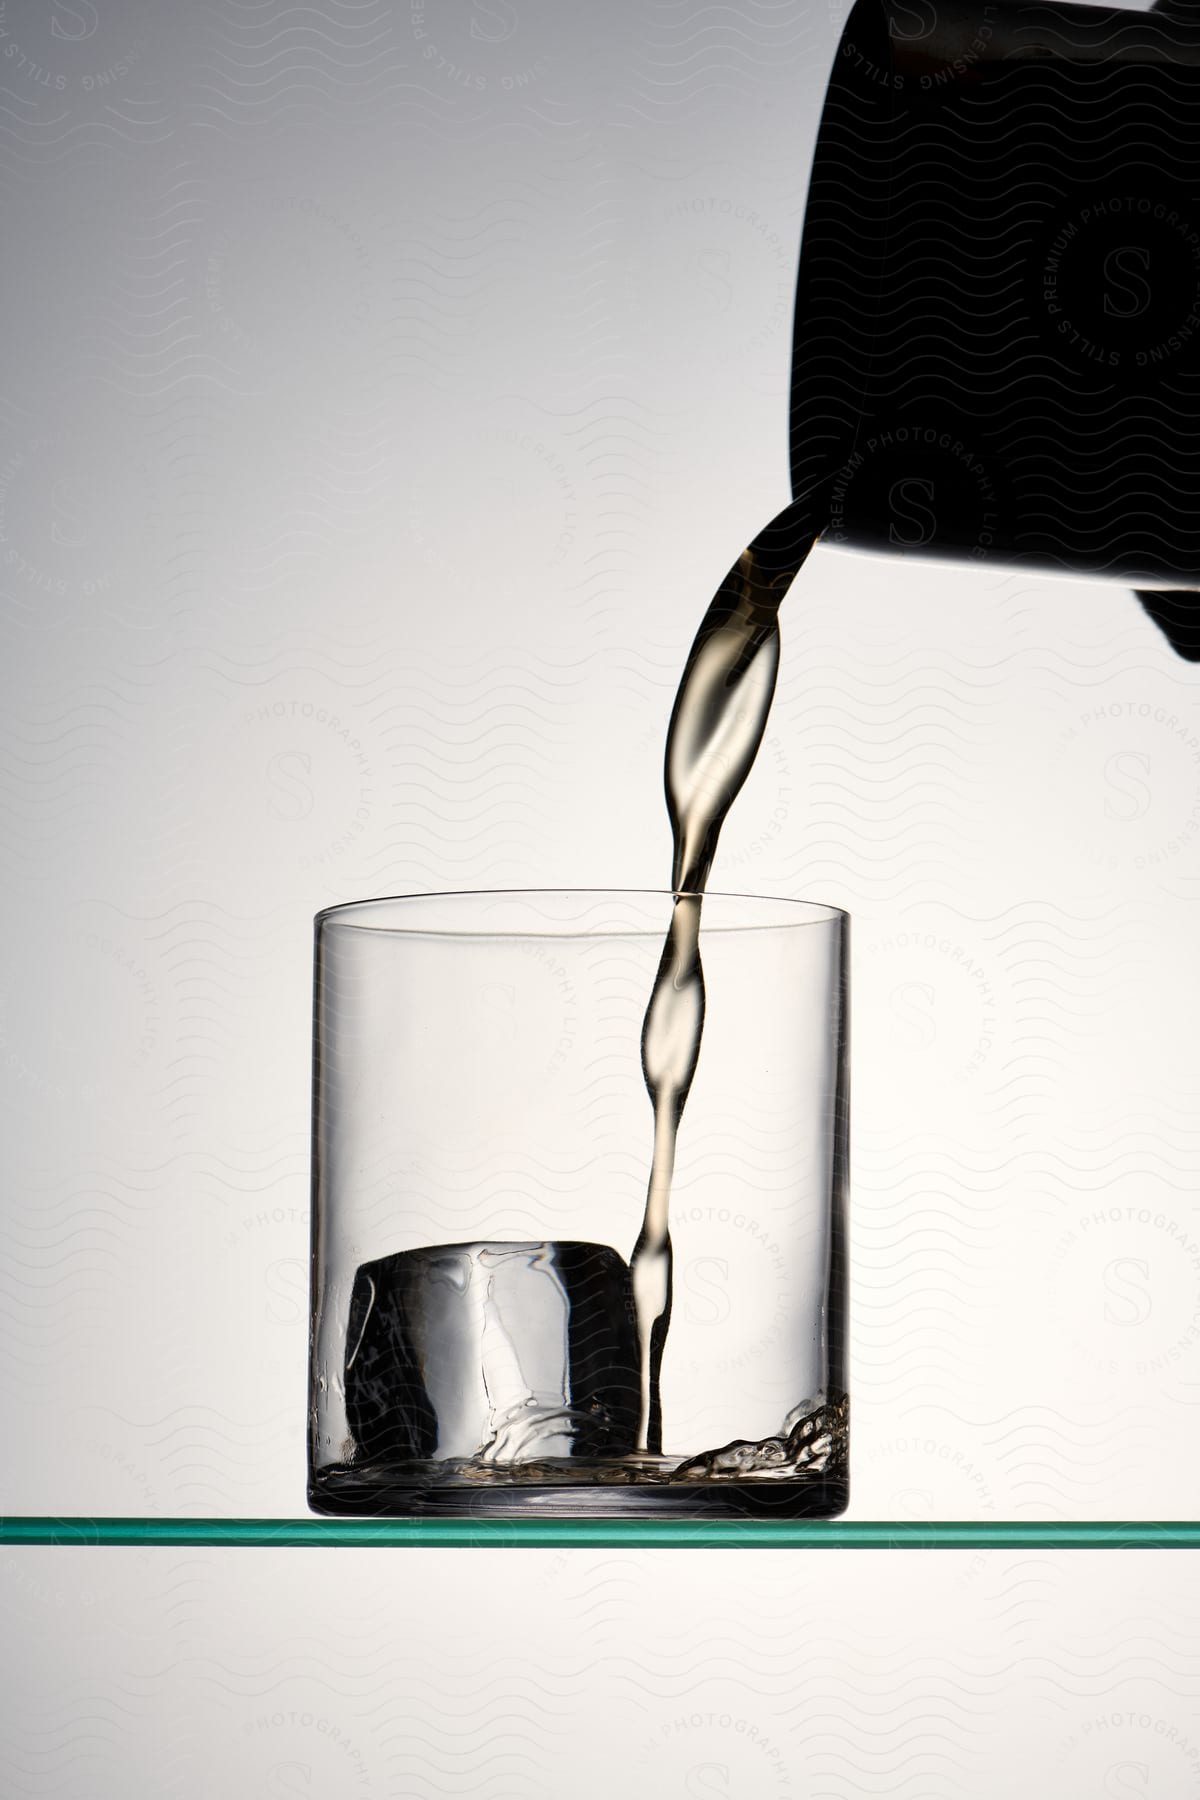 A beverage being poured into a water glass with an ice cube inside.